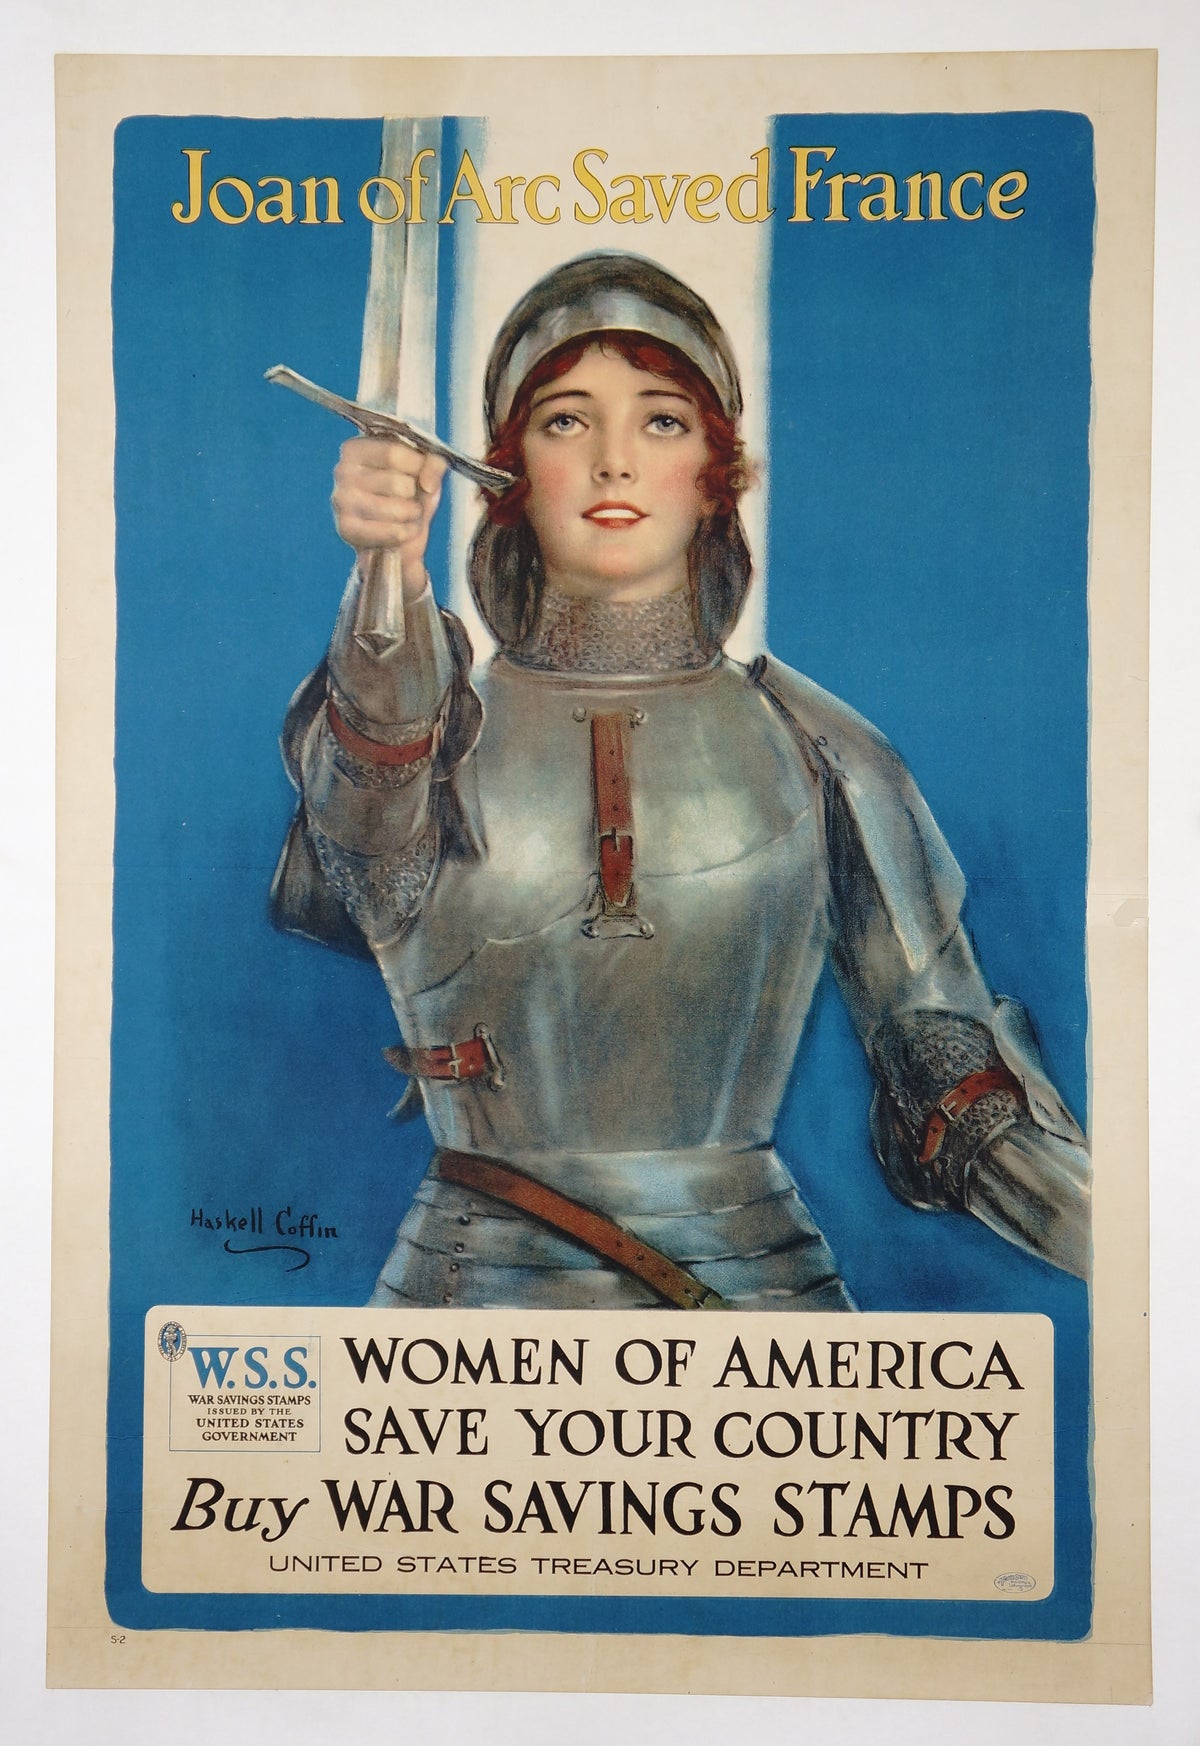 Joan of Arc Saved France - Authentic Vintage Poster